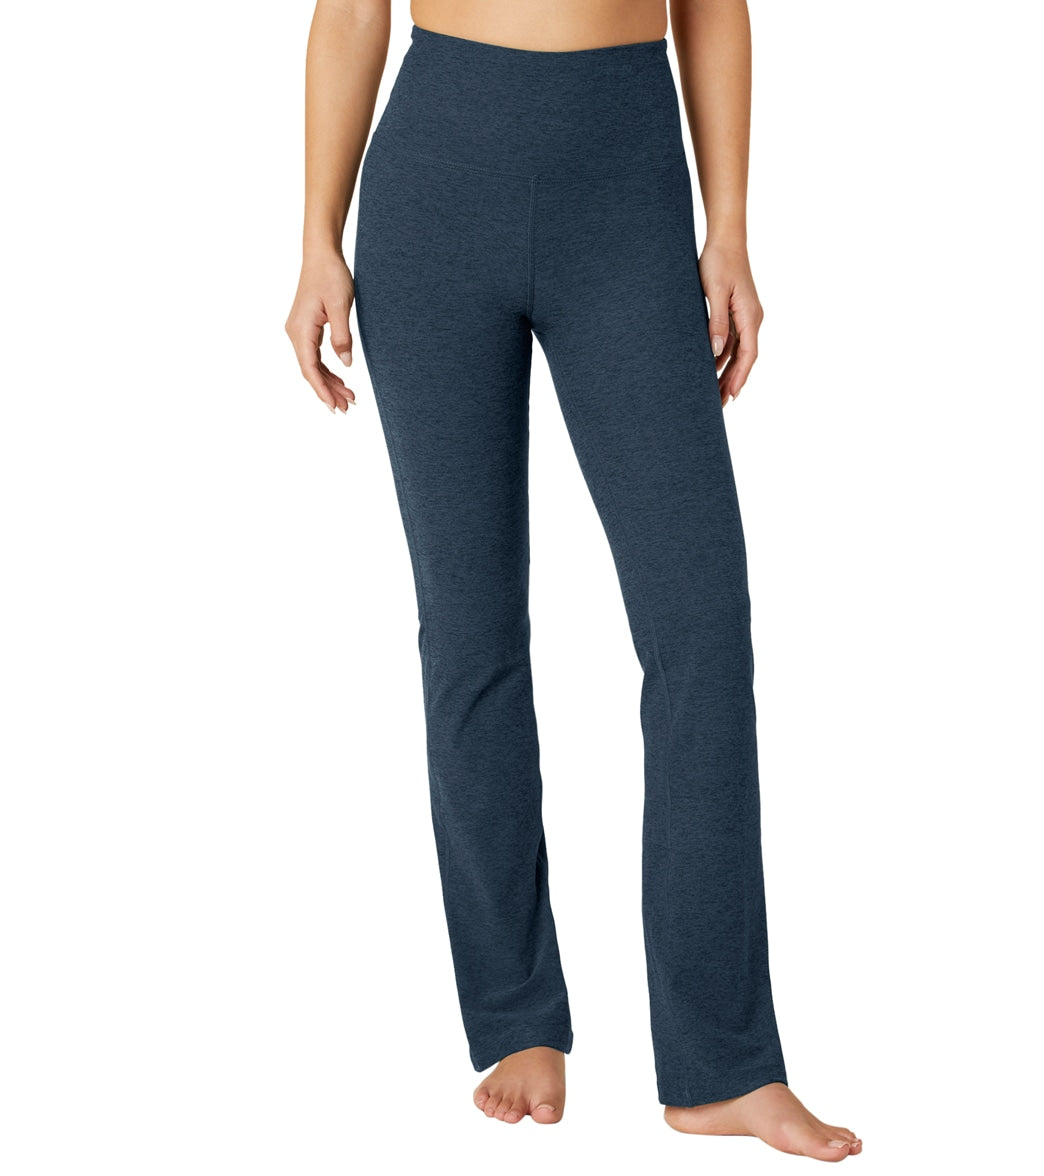 Pants from Beyond Yoga for Women in Blue